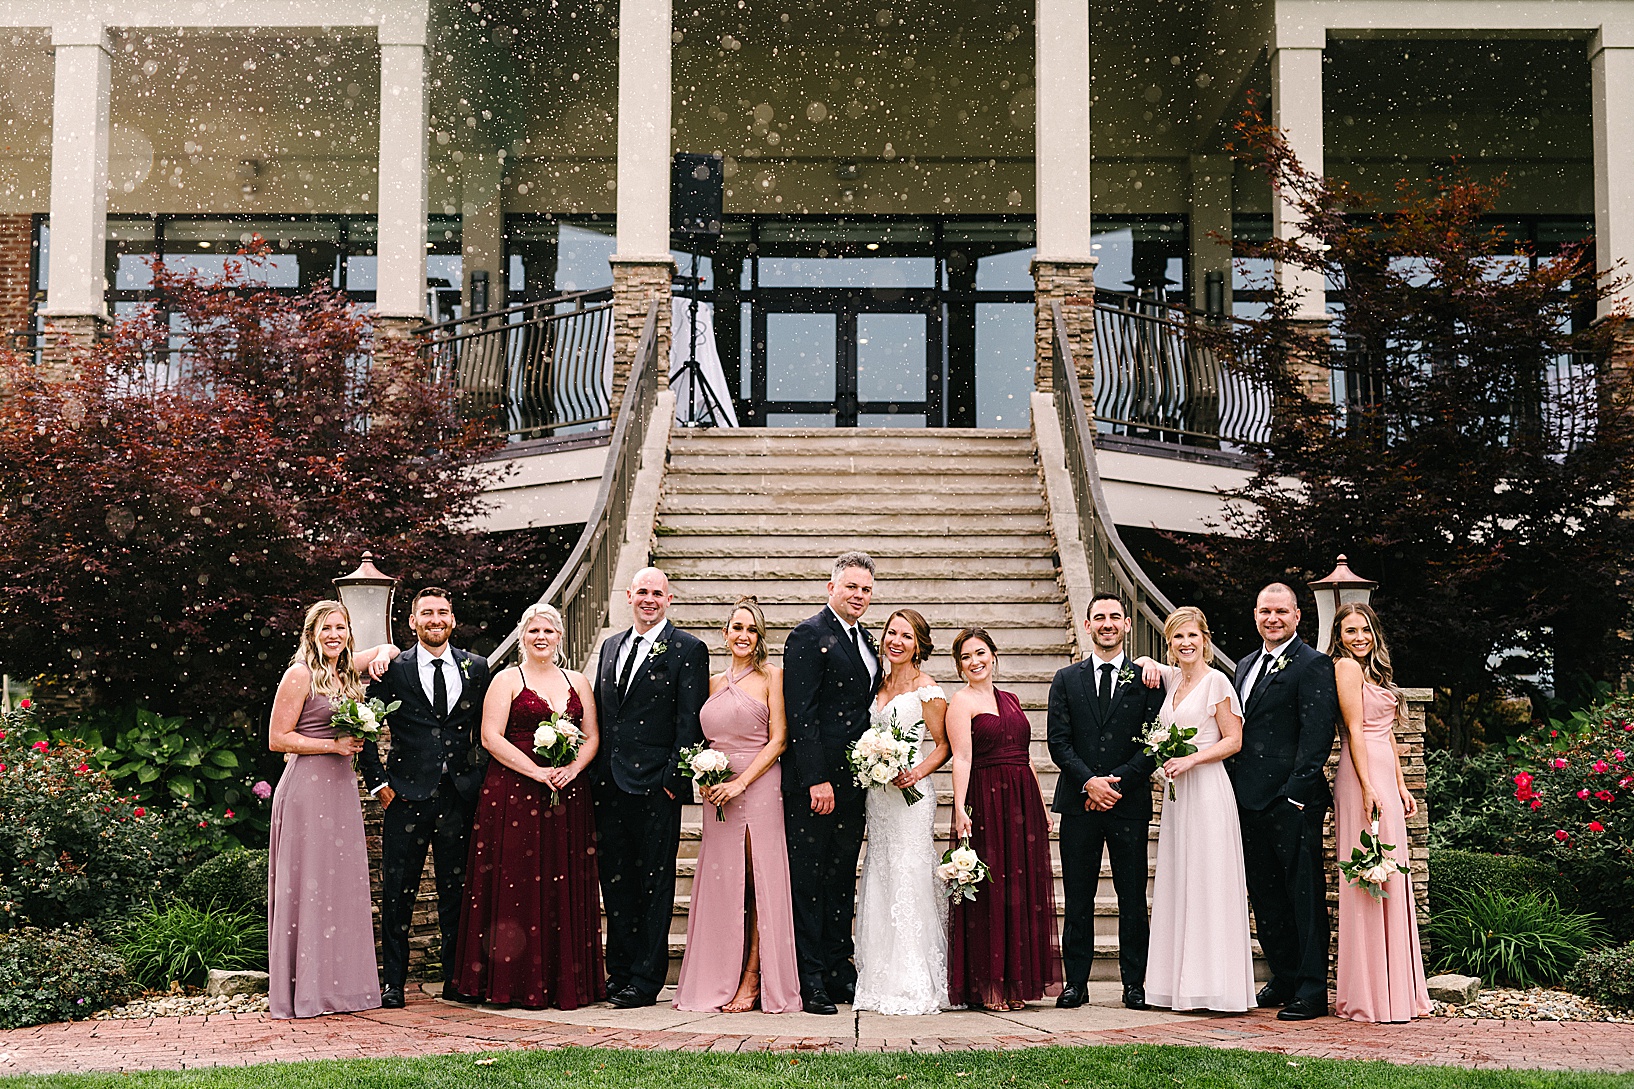 The wedding party all stands and smiles in front of the big steps of the Lake Club while light rain falls